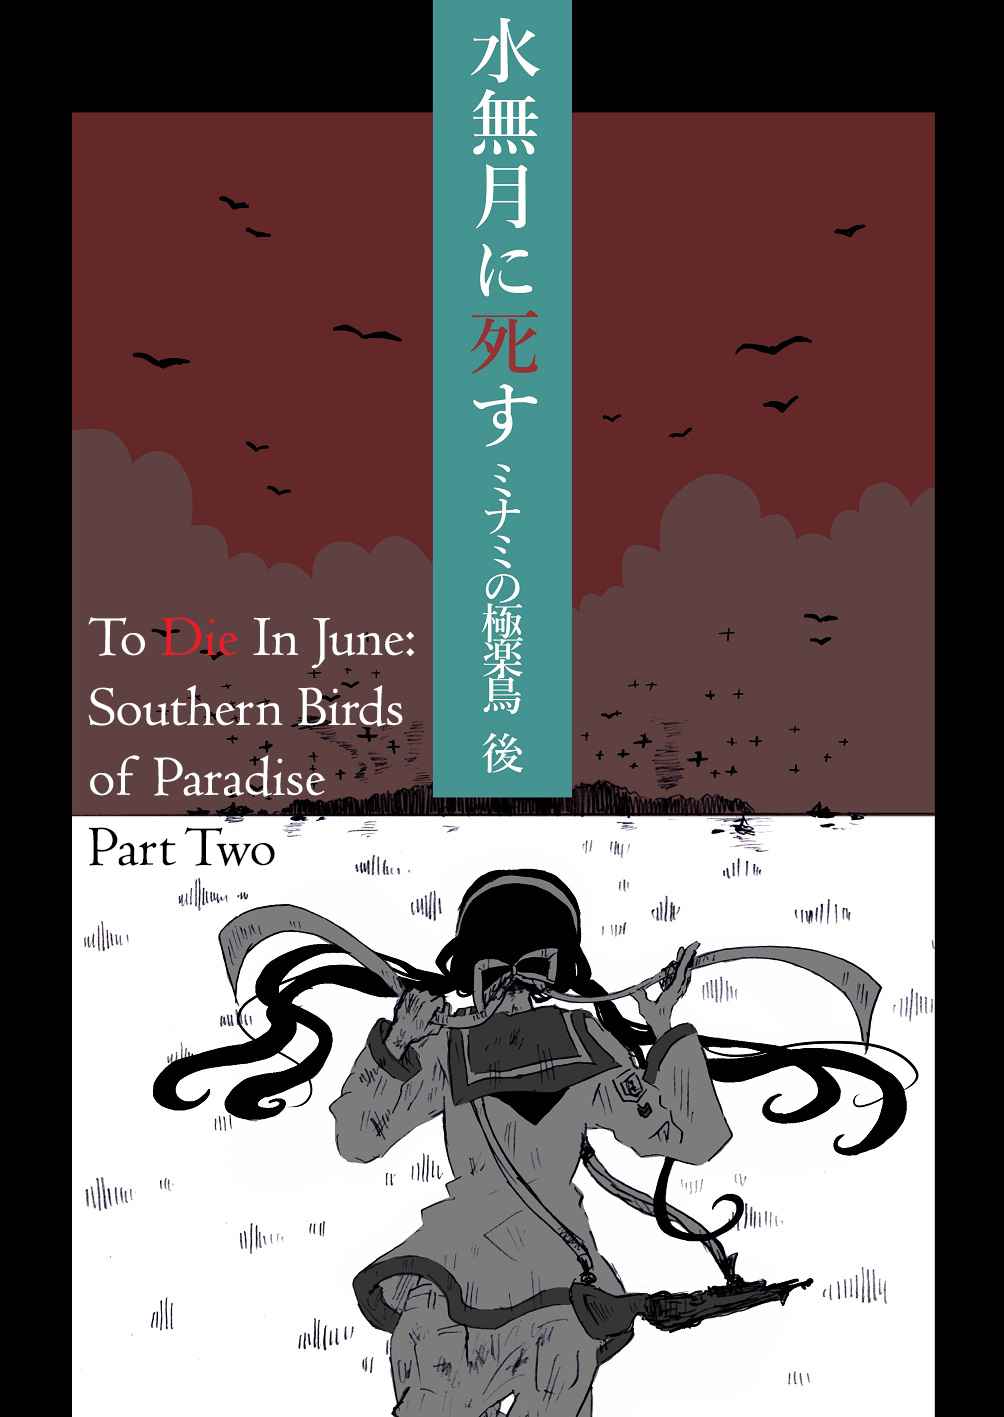 To Die In June Ch. 7 Southern Birds of Paradise, Part Two